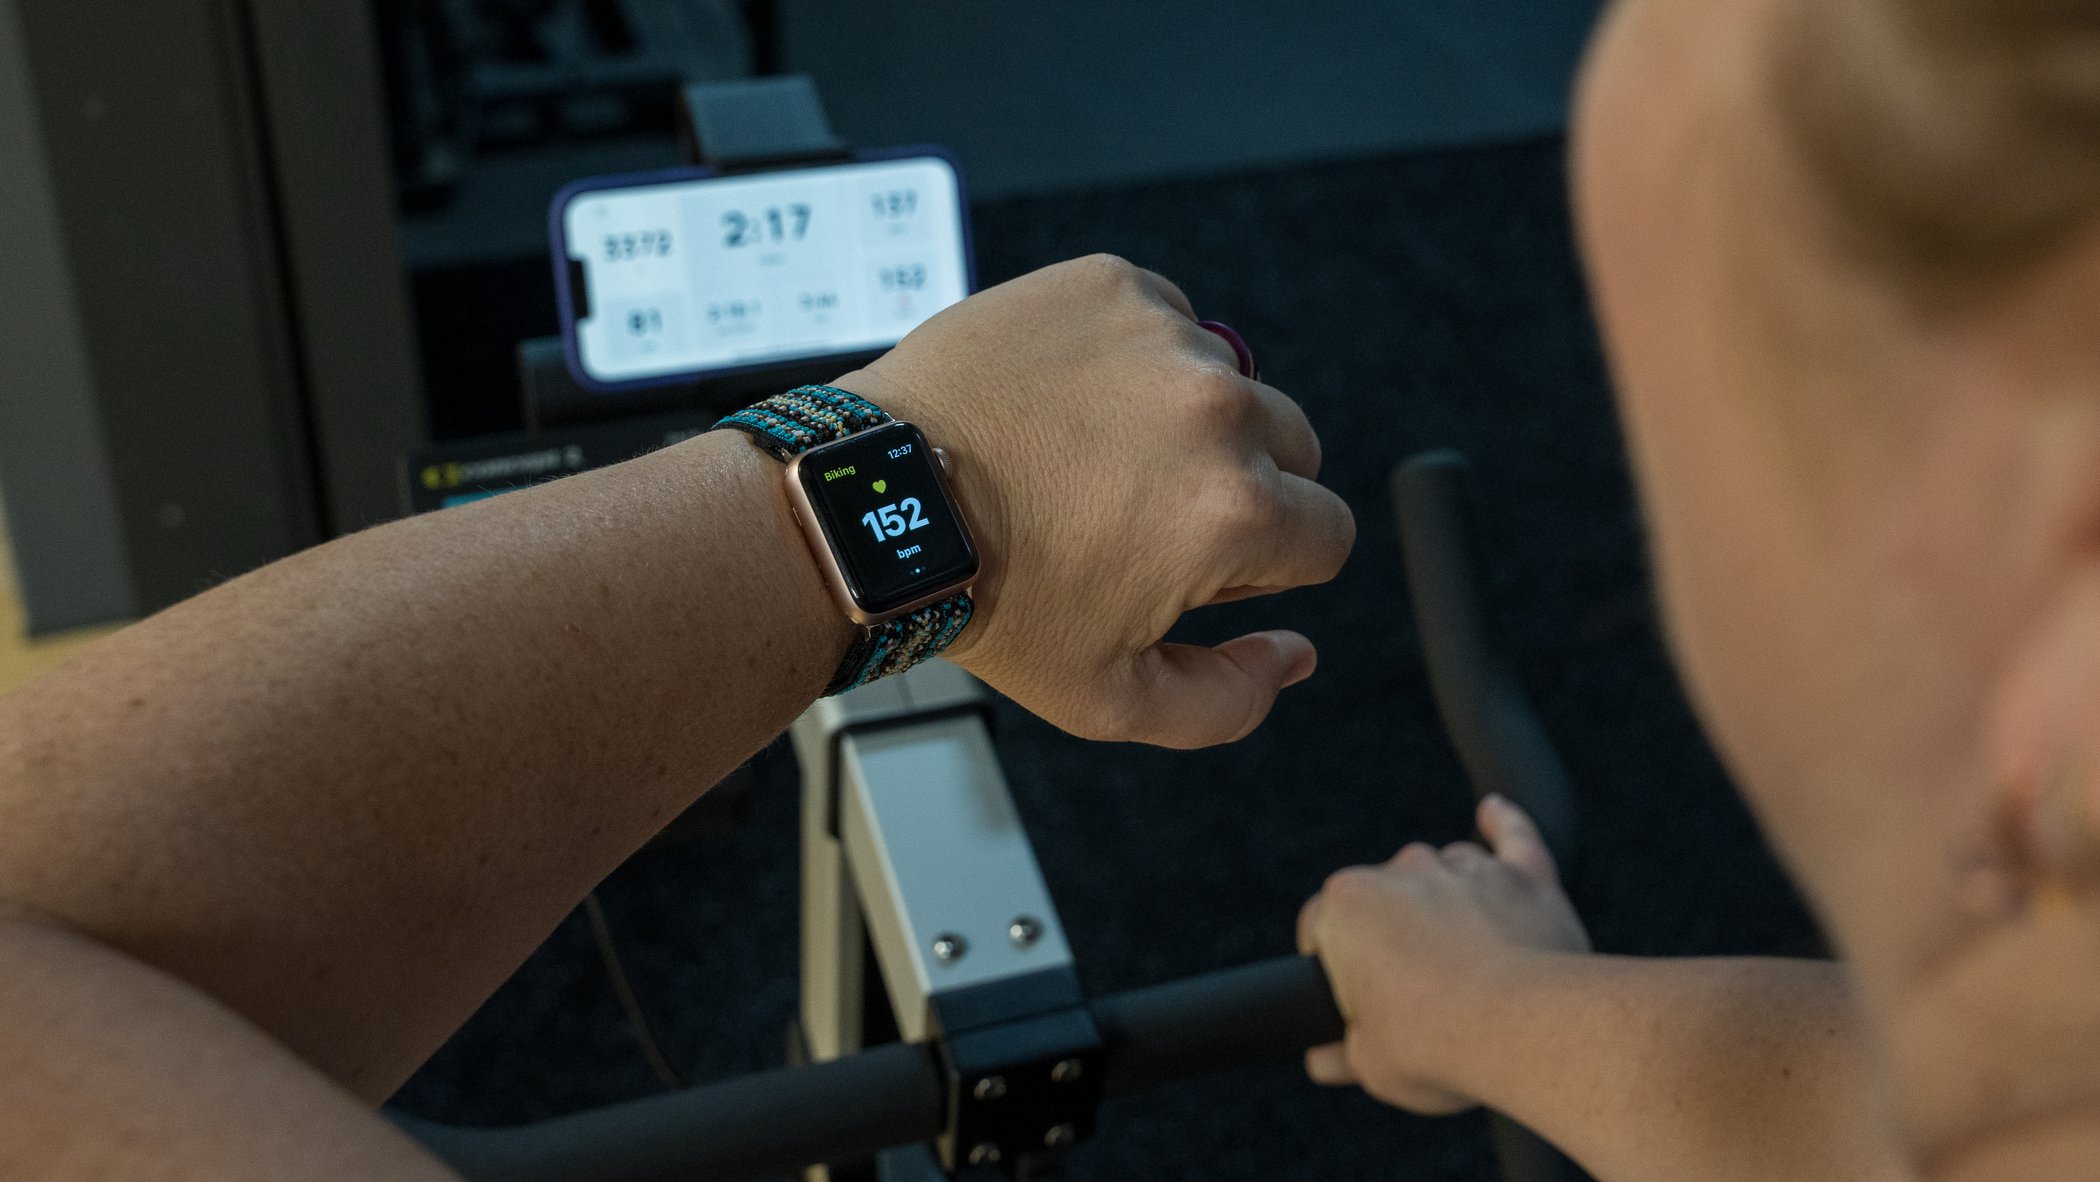 ErgData in use with the Apple Watch app